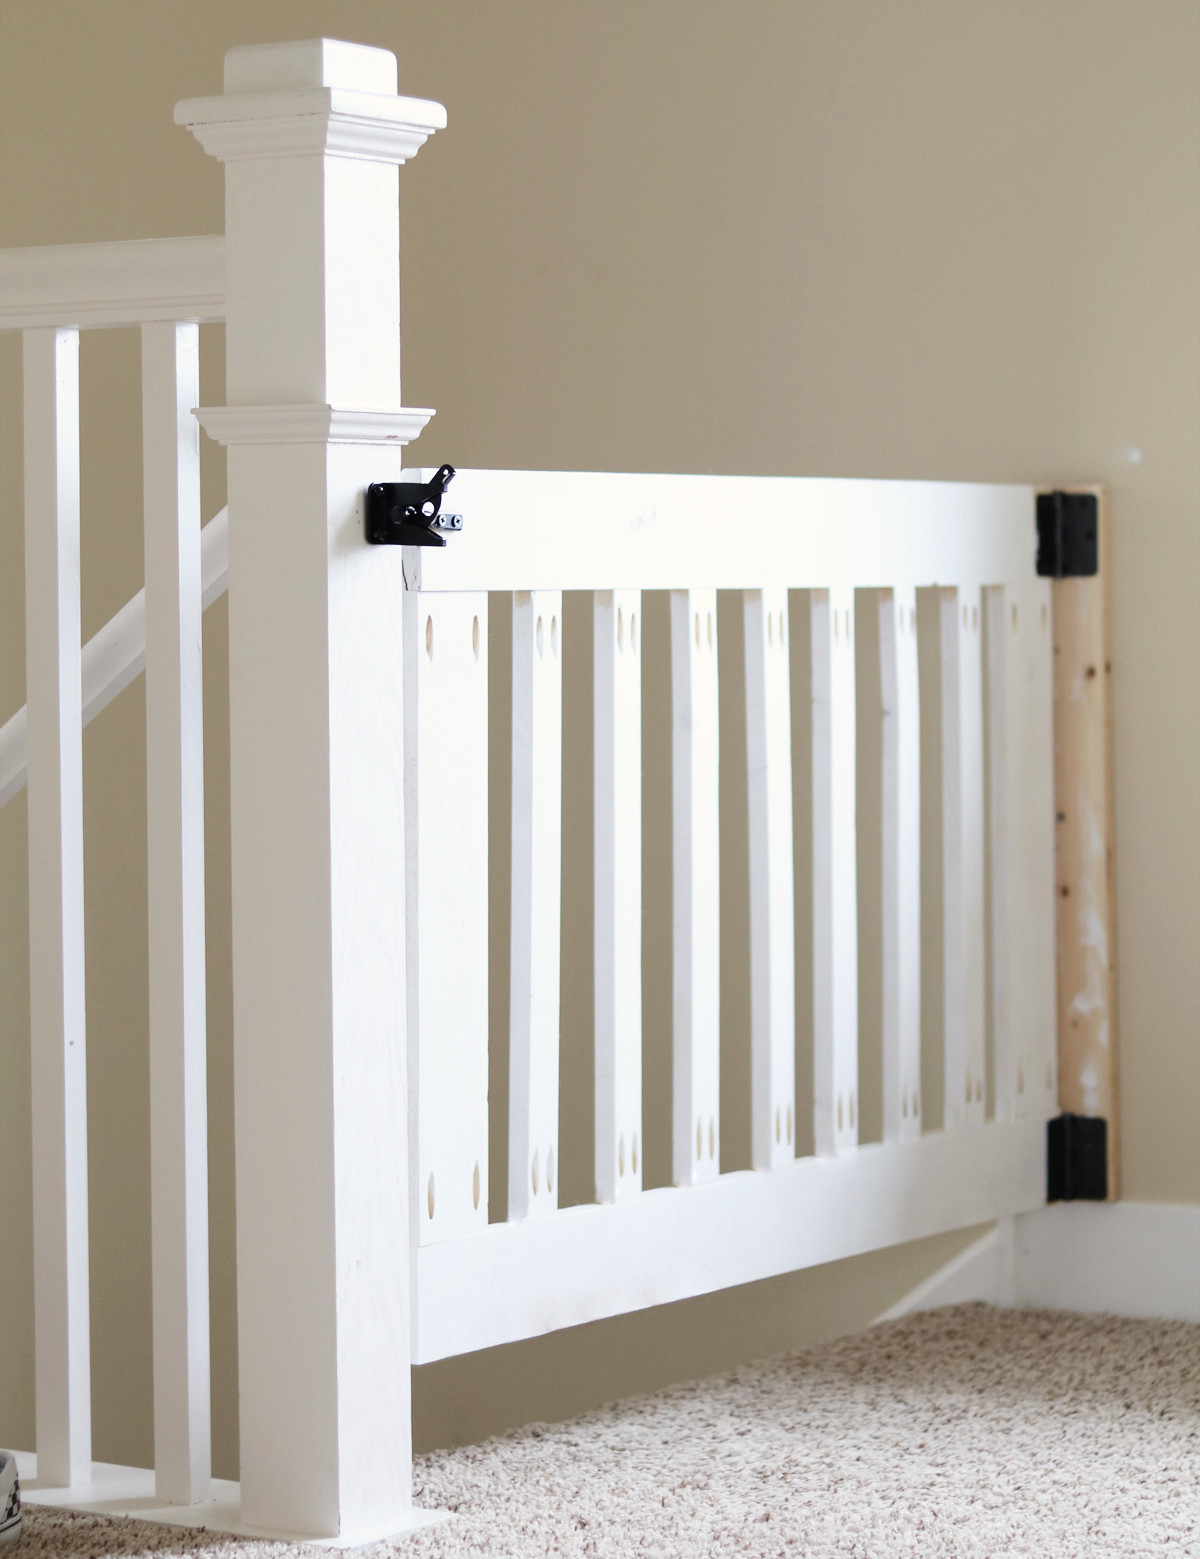 Diy Baby Fence
 DIY Baby Gate – The Love Notes Blog